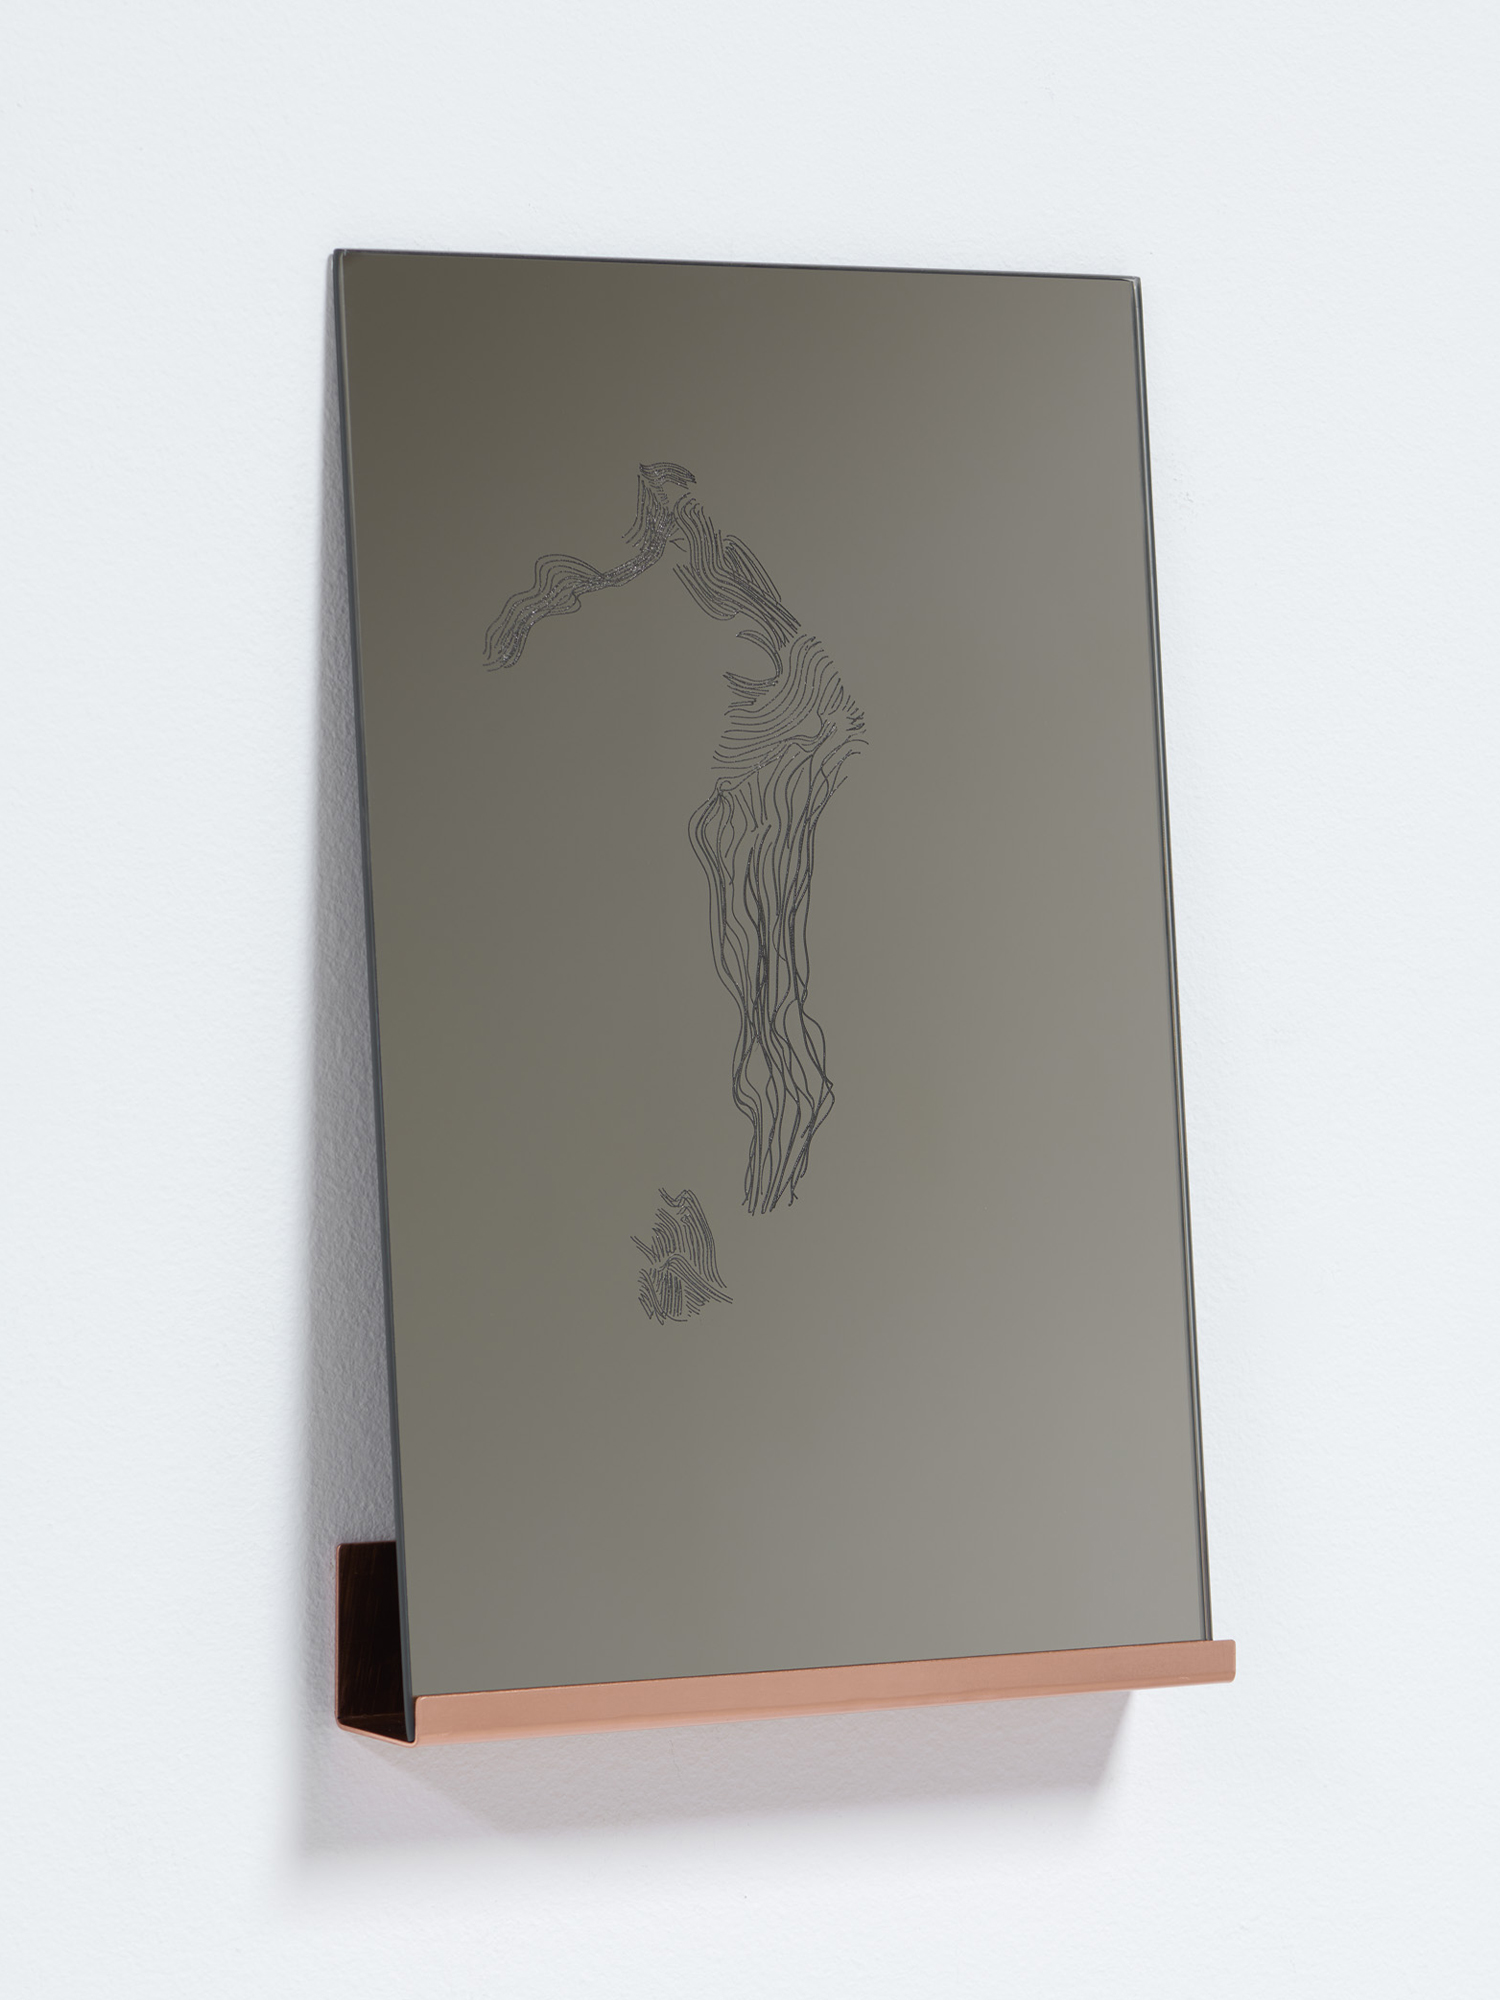 A-Place-Of-Water-Wetlands_Mirror-Copper_11x17x2_2021